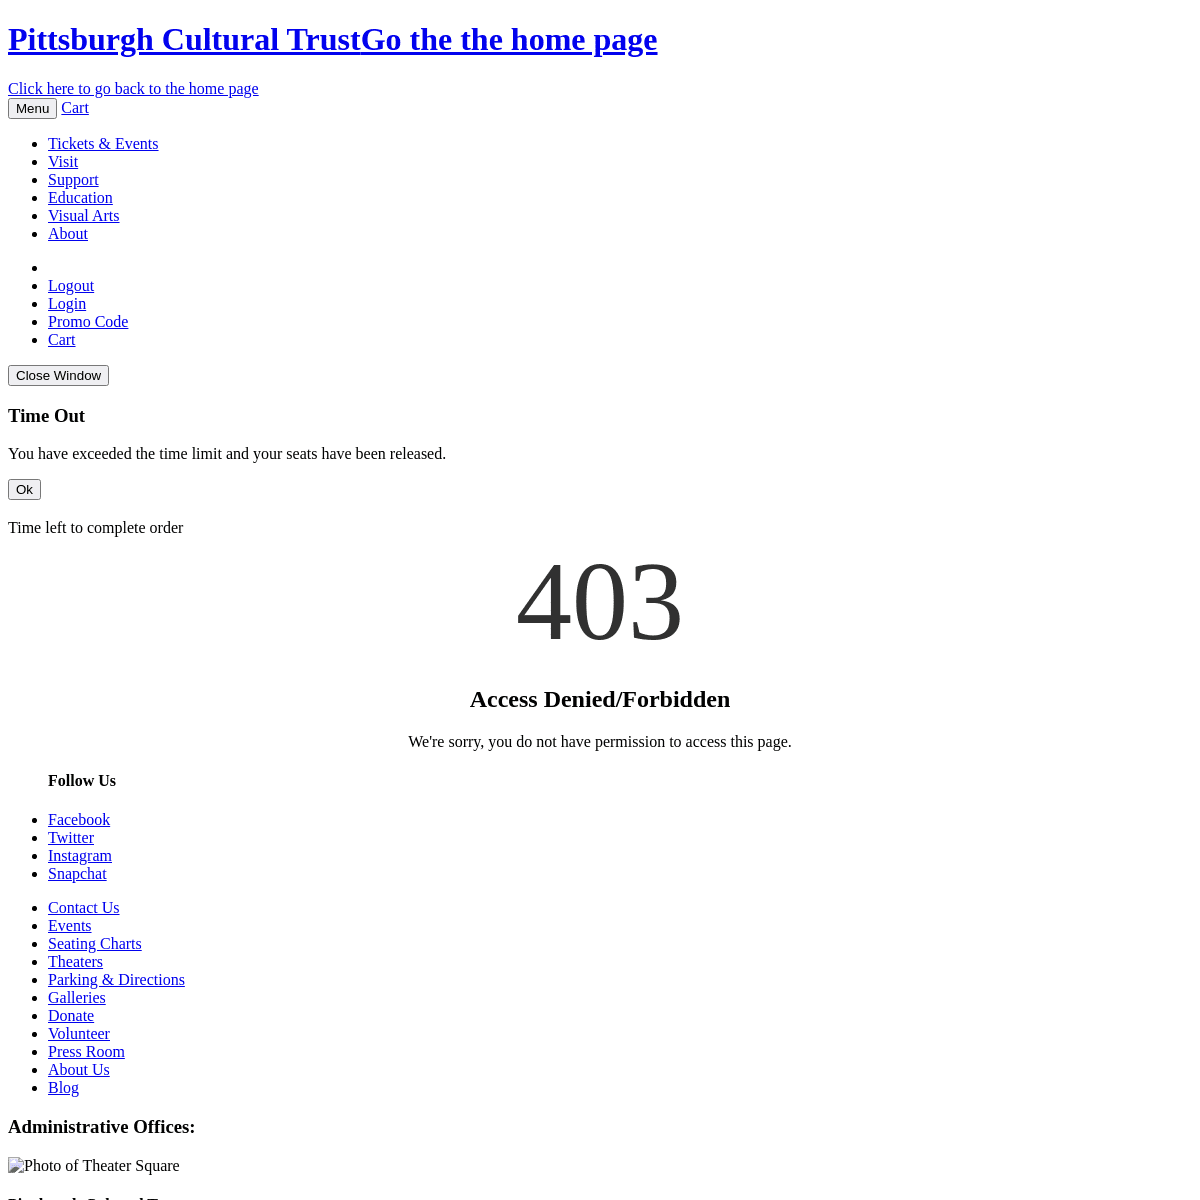 A complete backup of https://pgharts.org